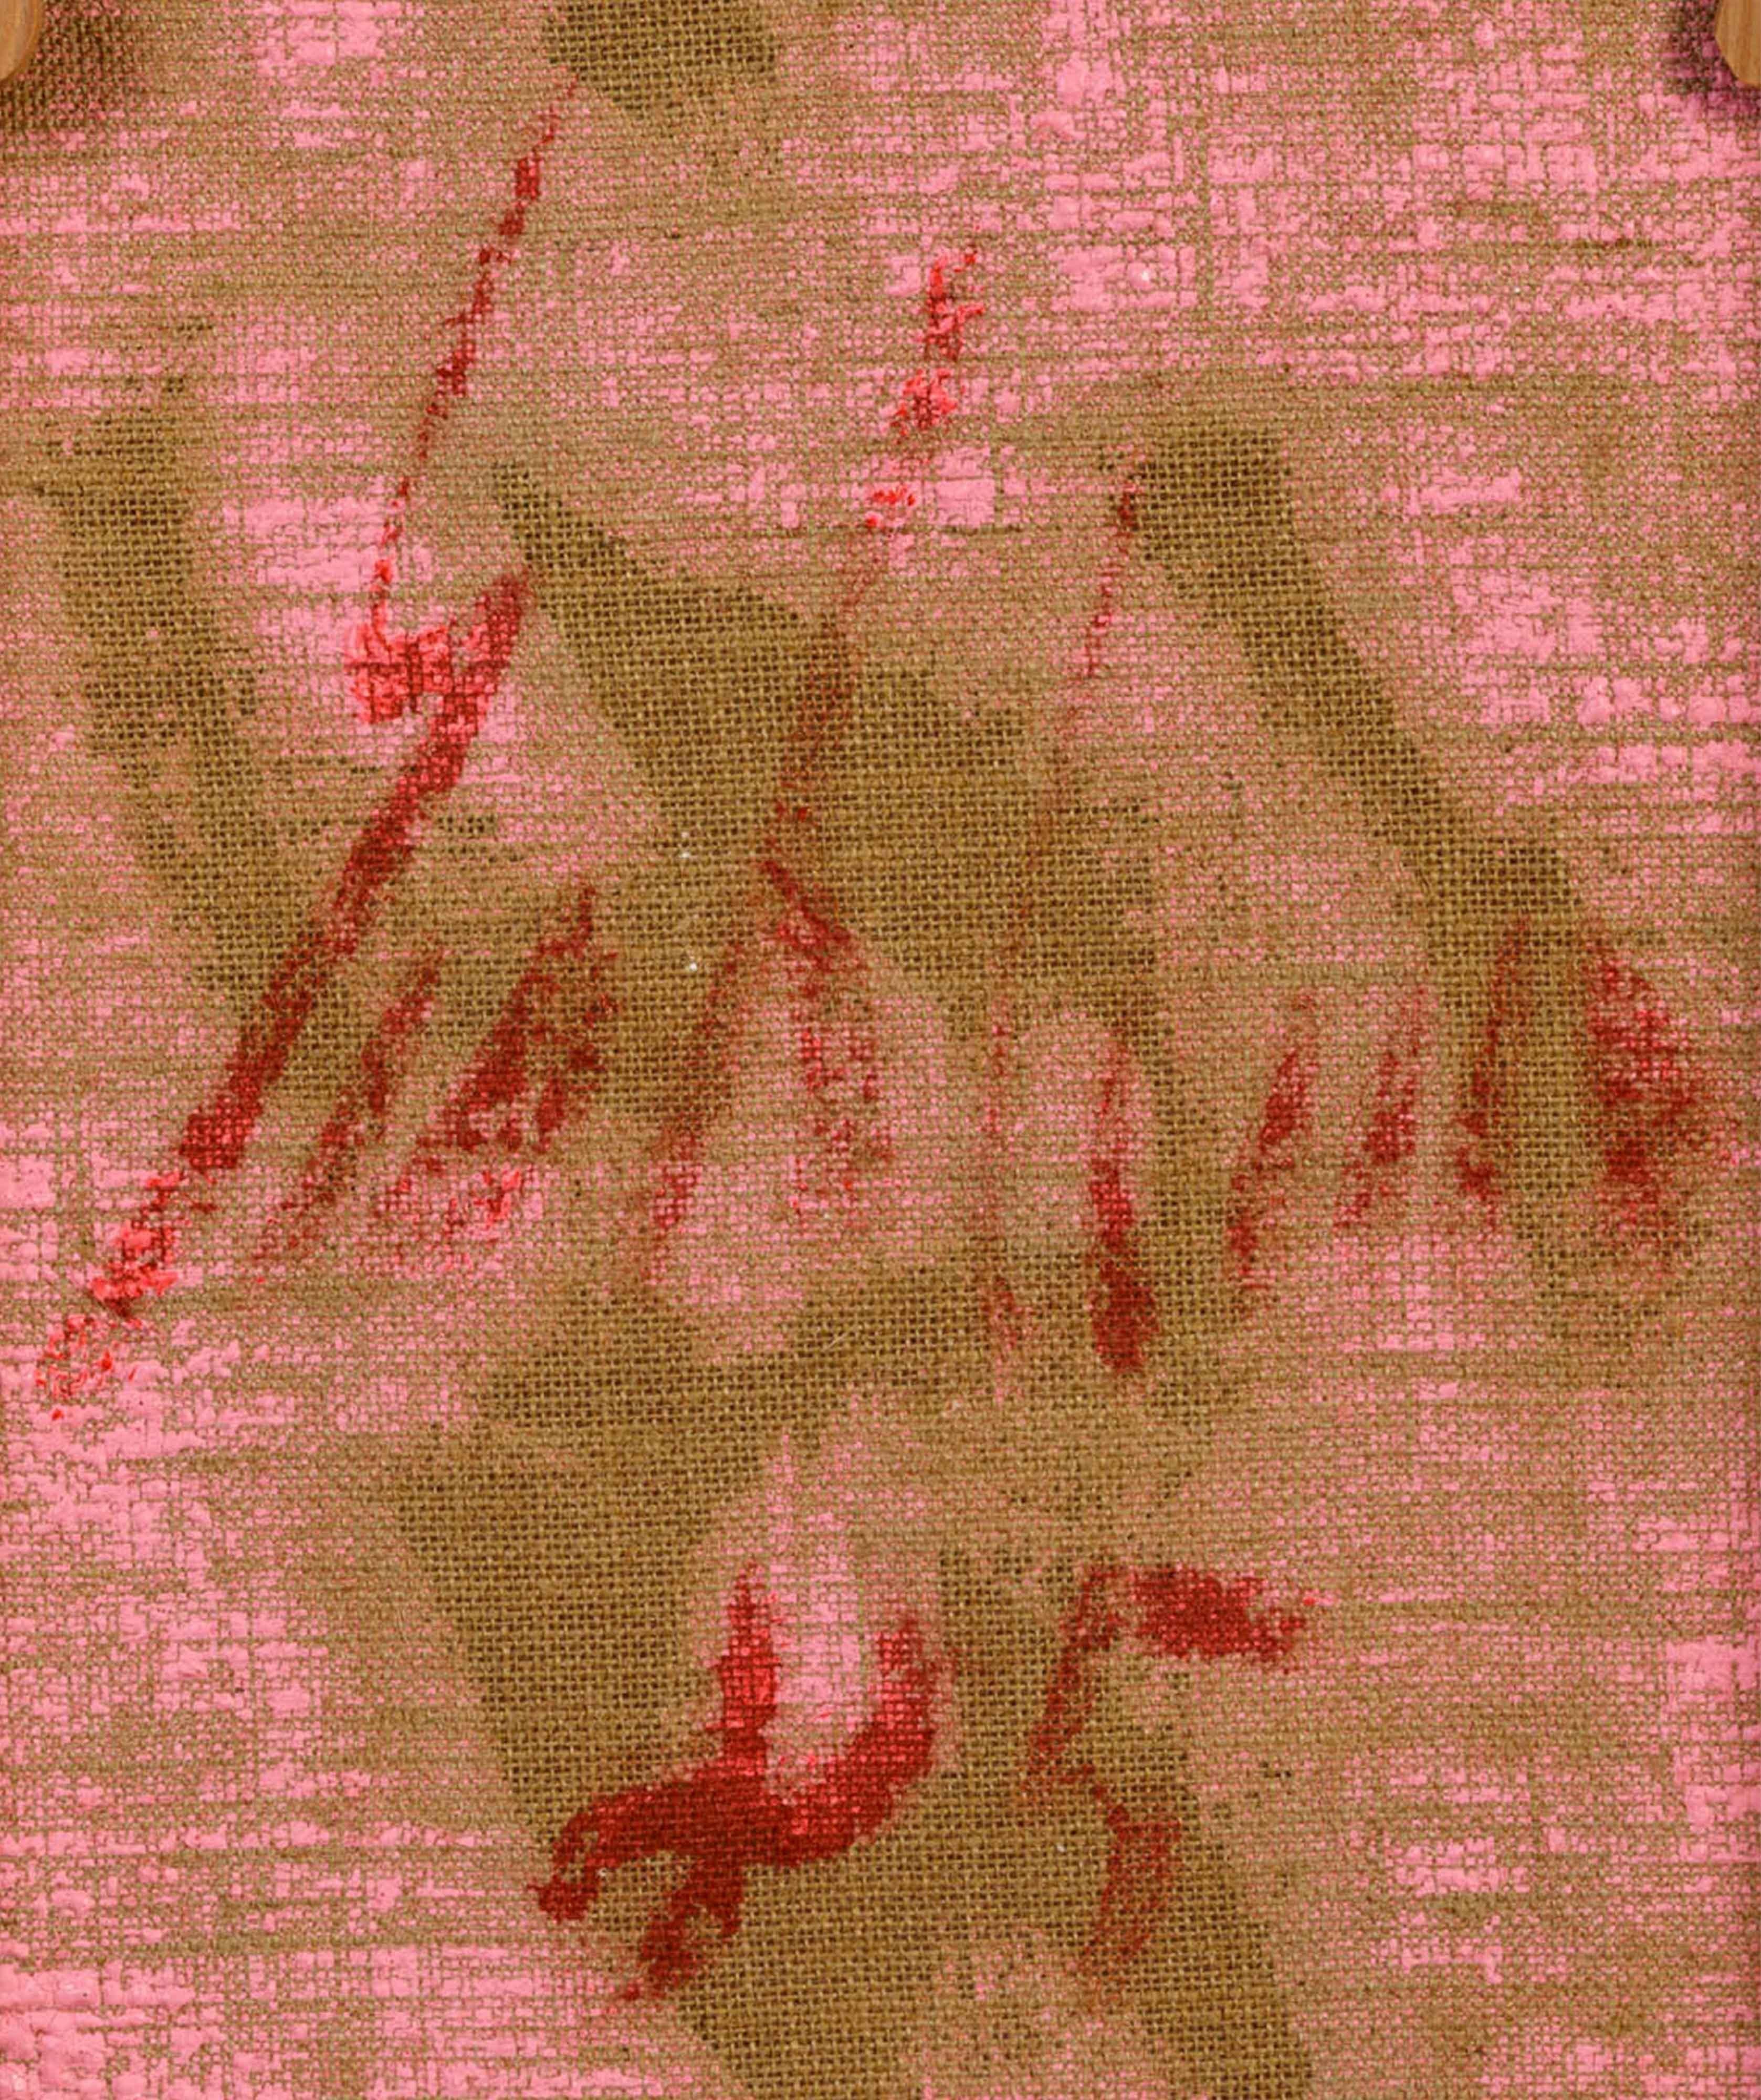 Untitled, Pink, Jute Canvas - Abstract Painting by Salvatore Emblema